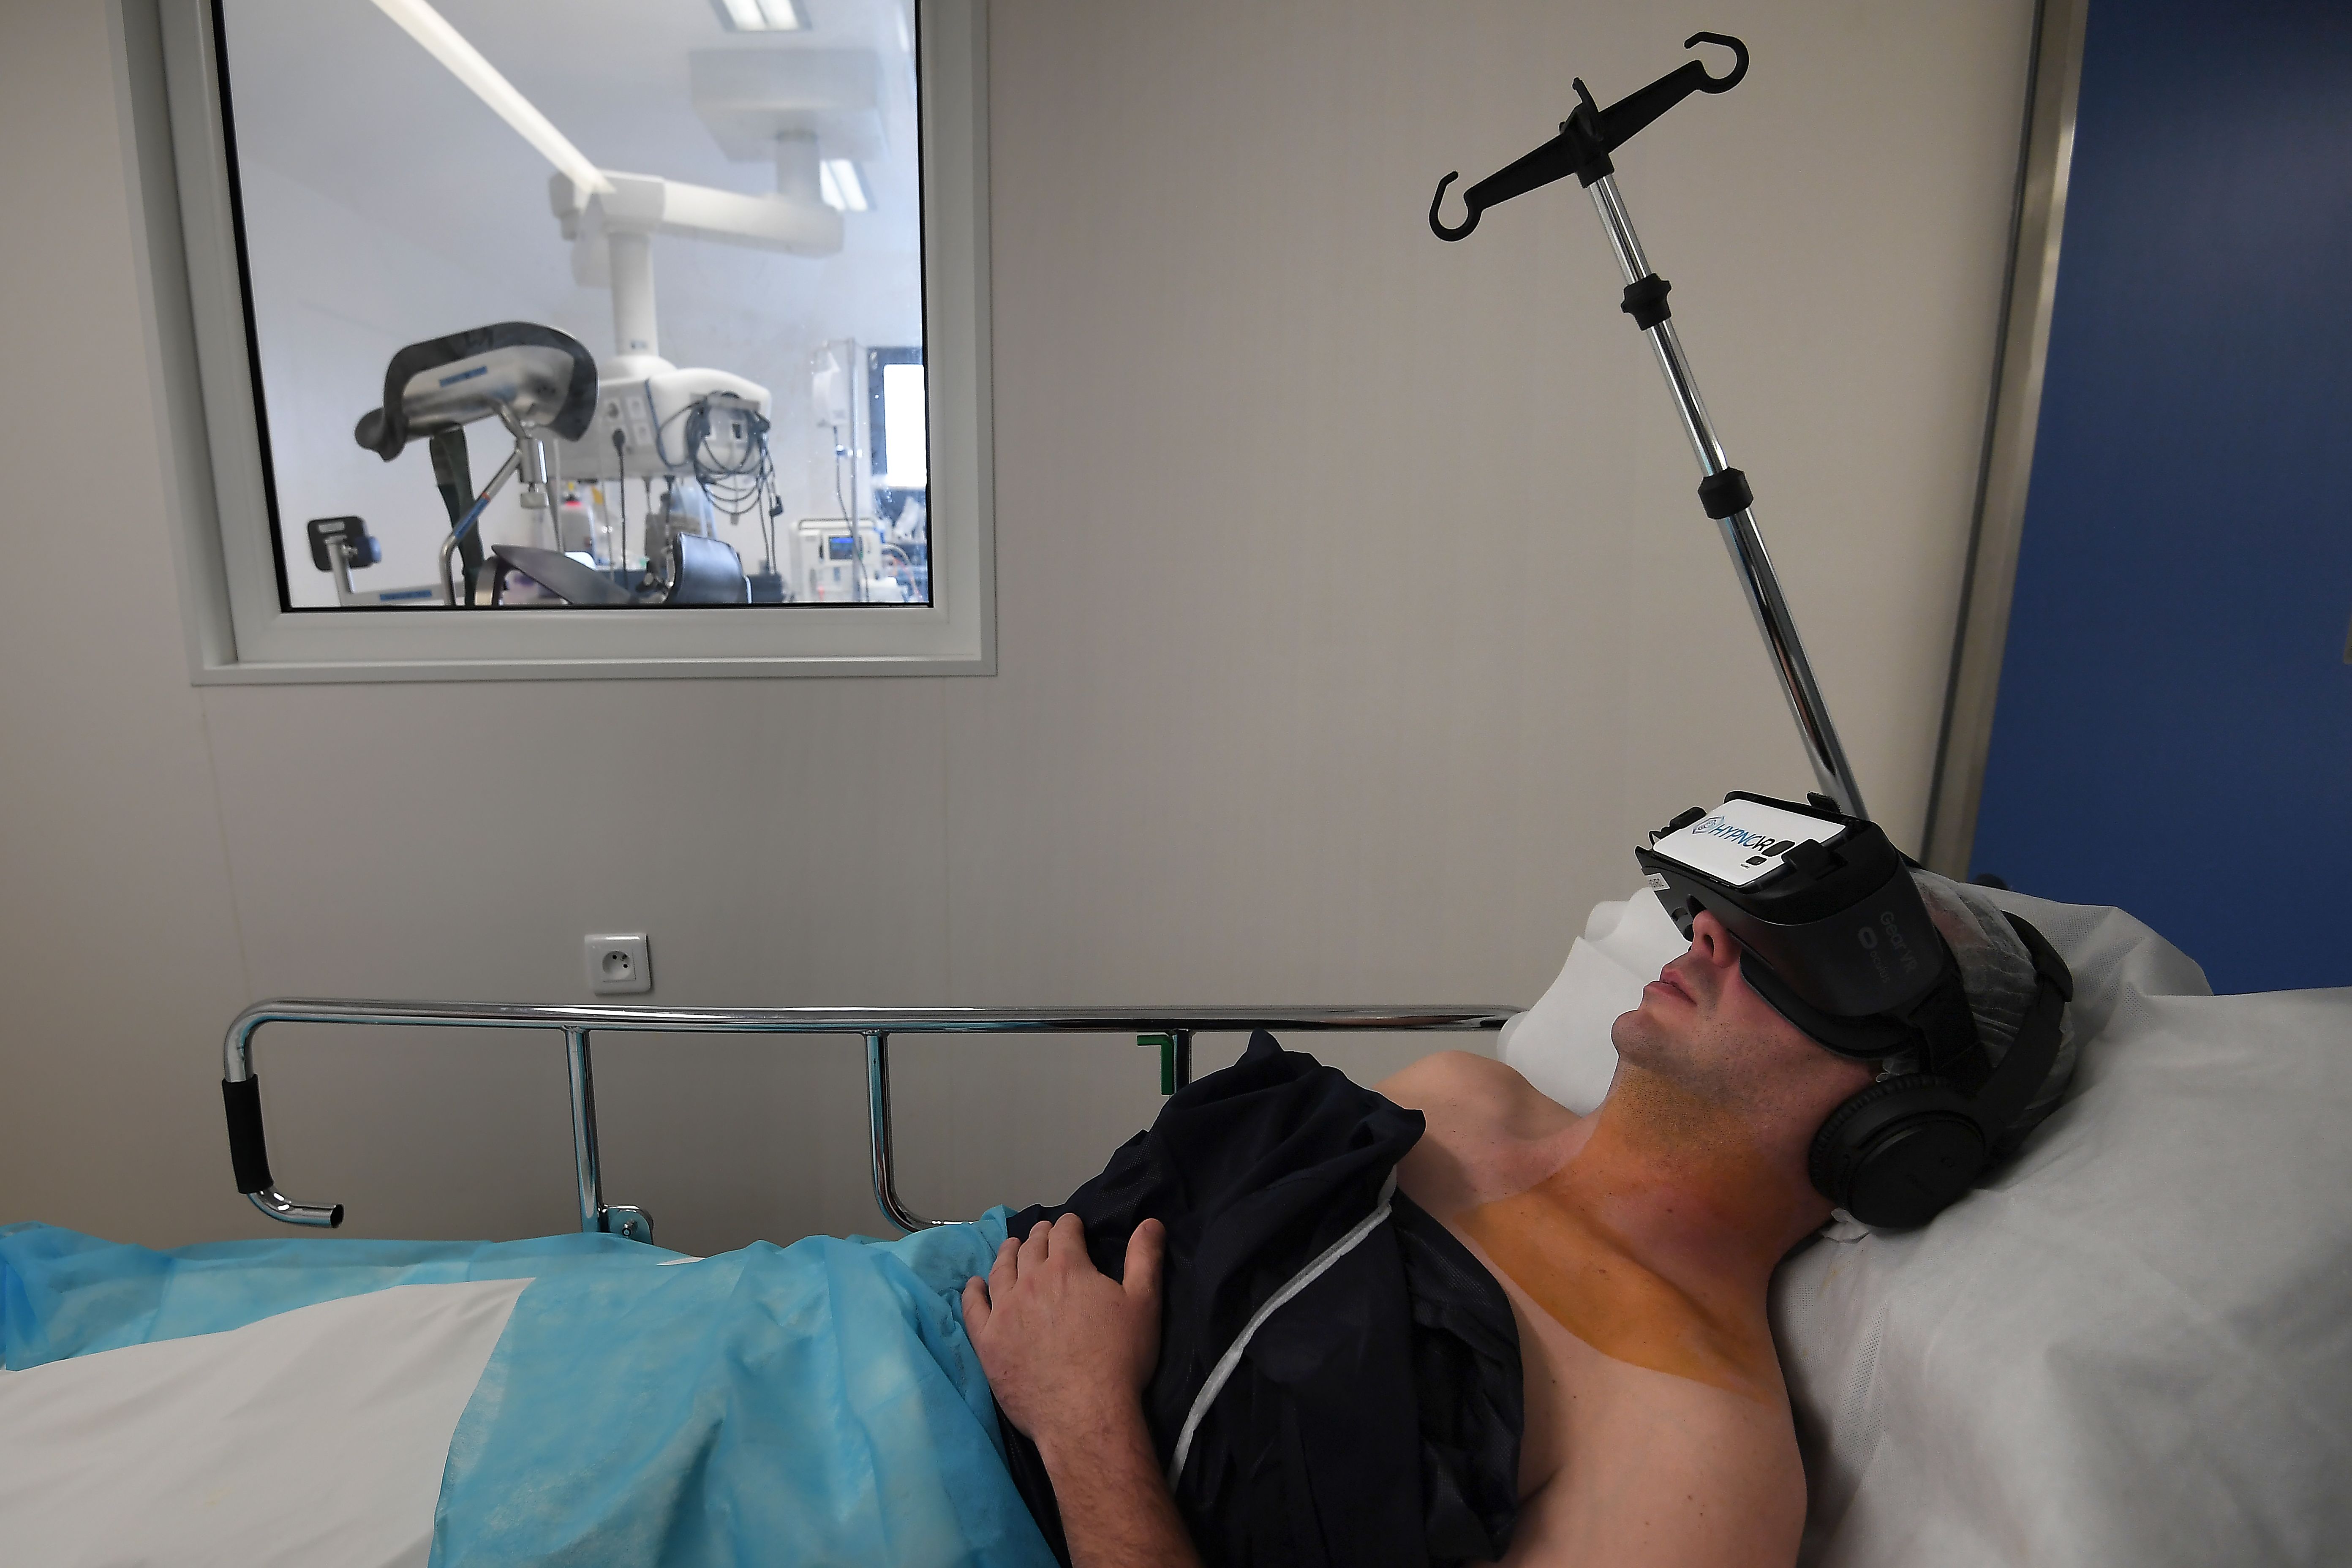 Study finds surgery patients wearing VR headsets needed less anesthetic